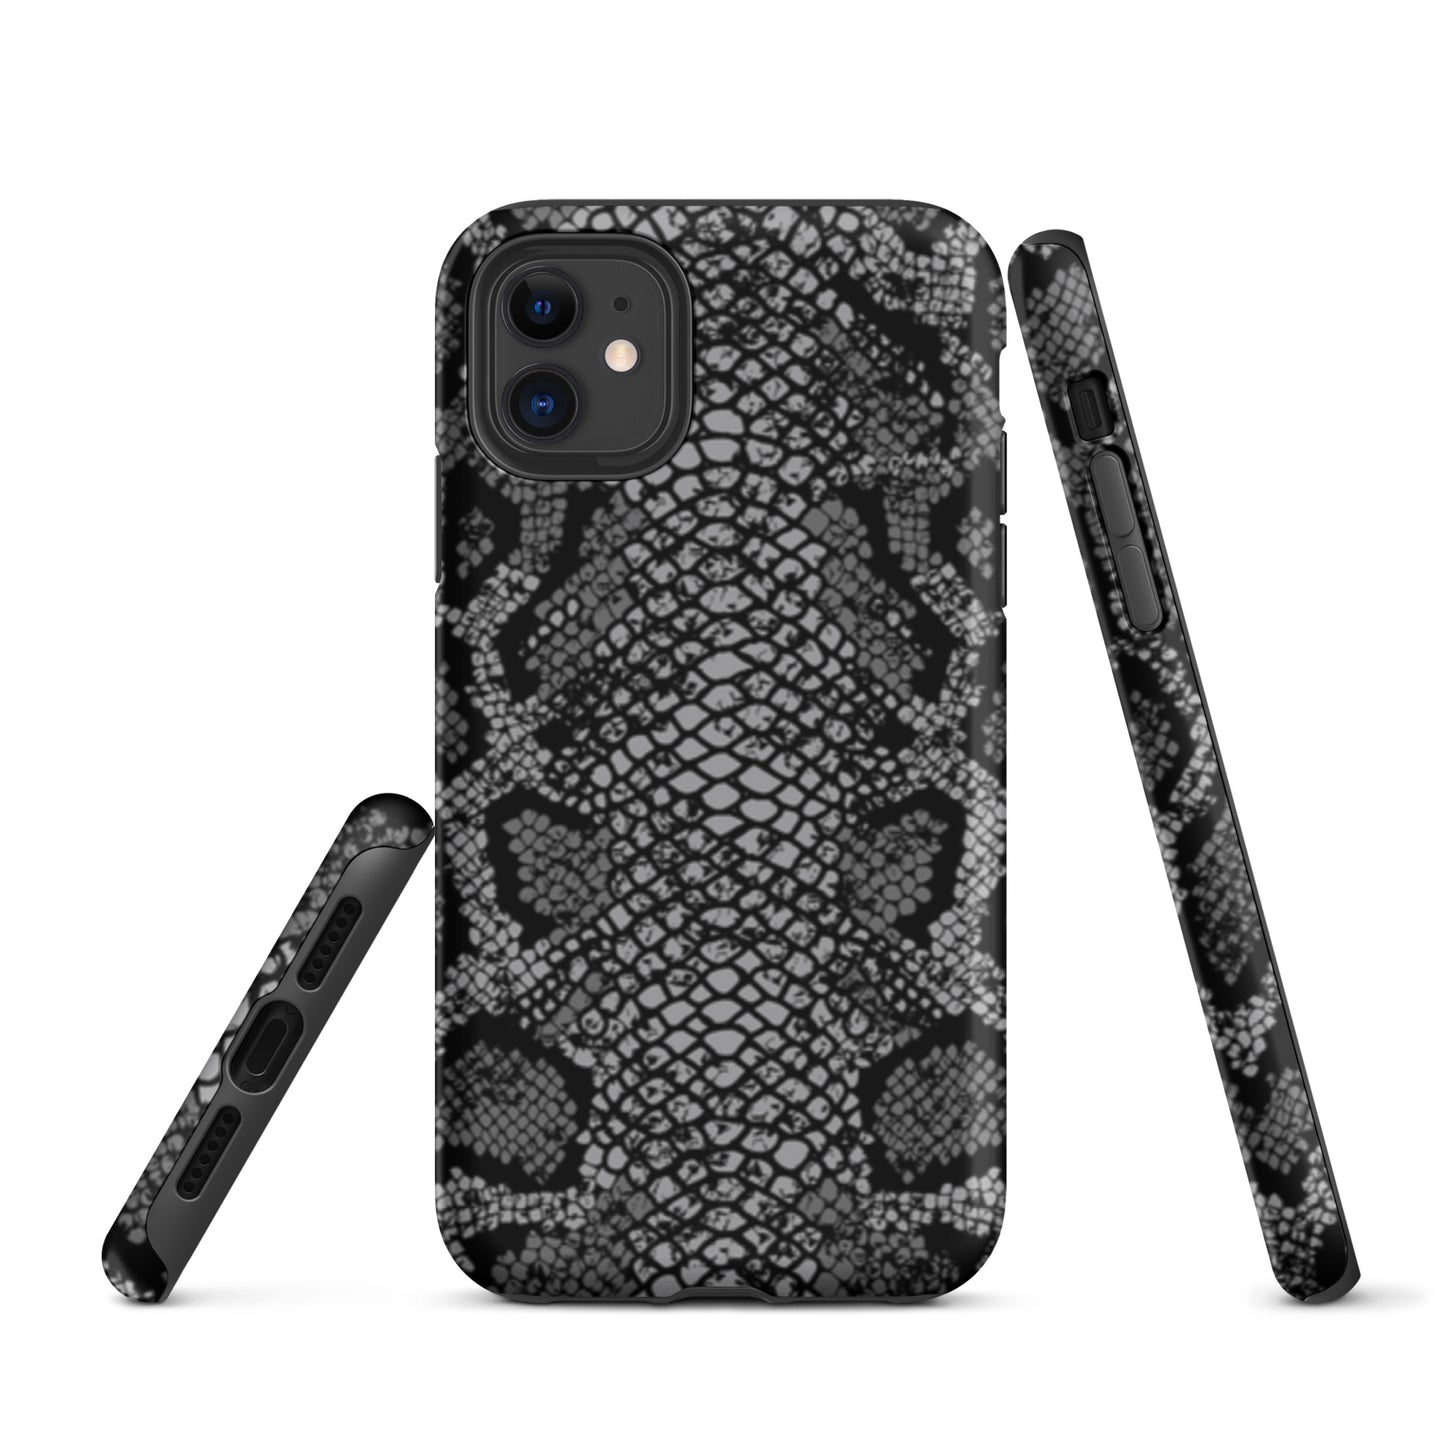 iCase Black Snake HardCase Coque pour iPhone